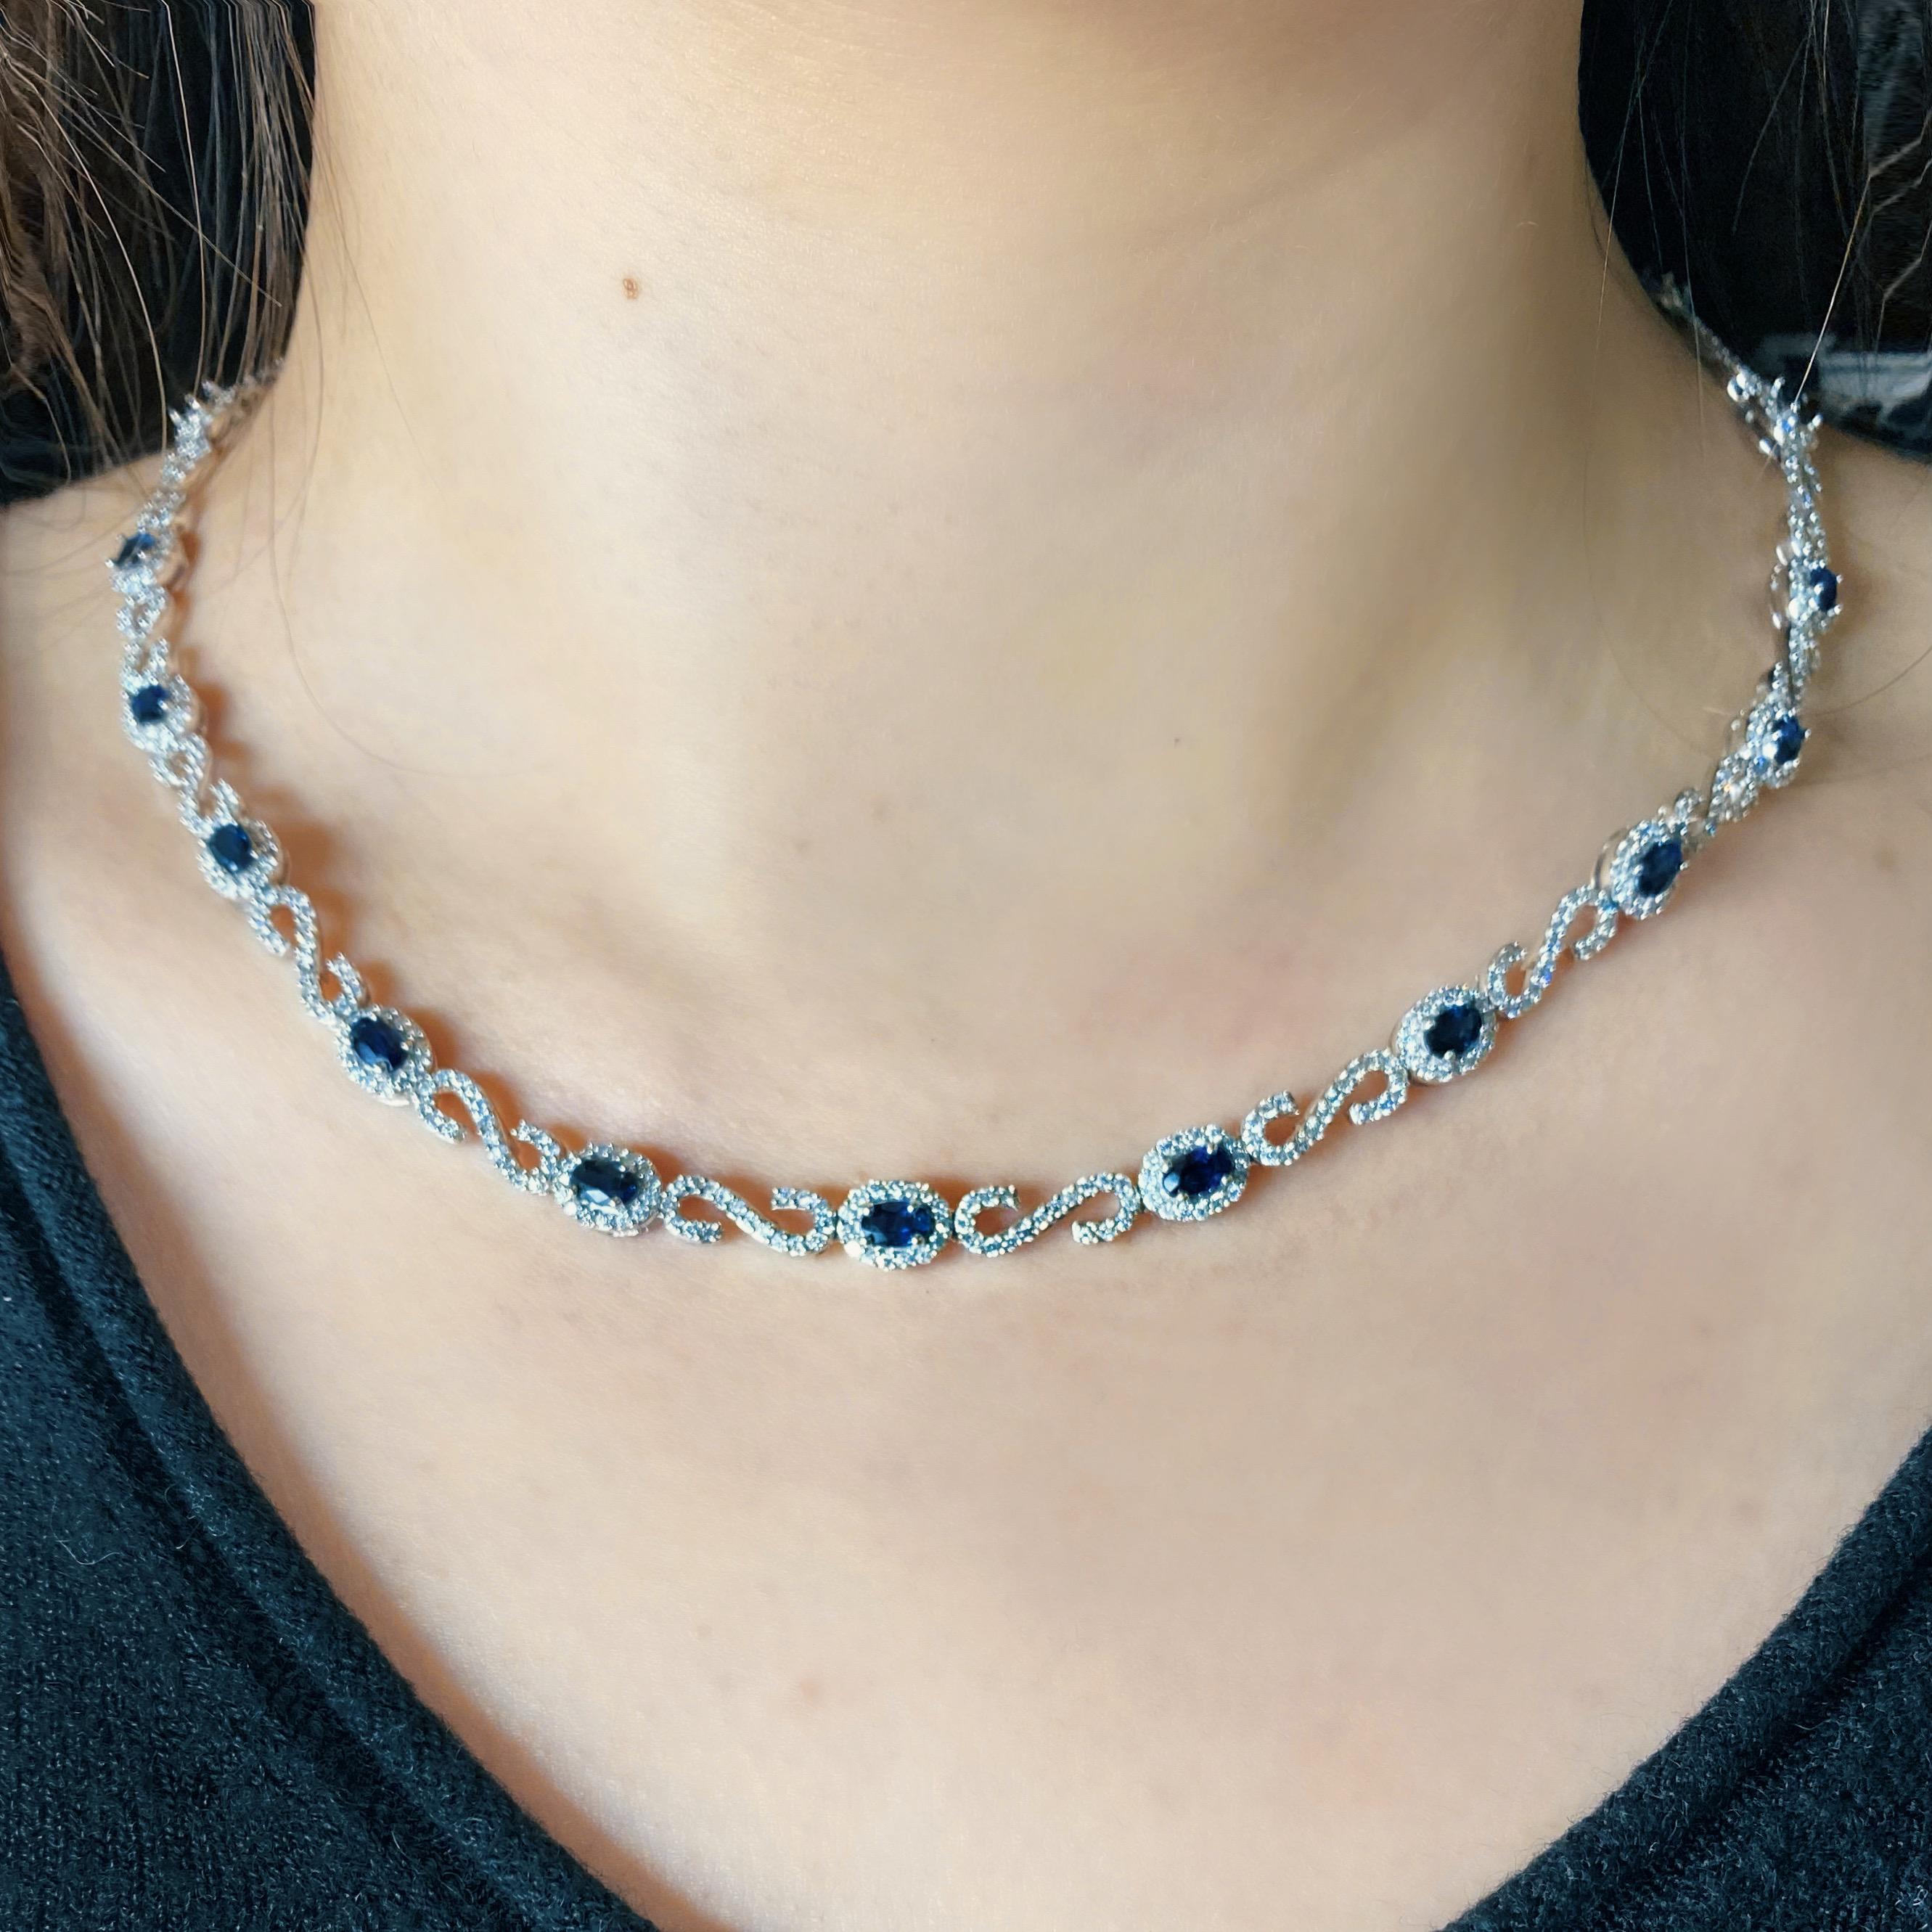 14kt white gold necklace
3.00ct total weight diamonds
5.00ct total Sapphires
Round brilliant cut diamonds
Color/Clarity: F/G-VS2/SI1
16.50